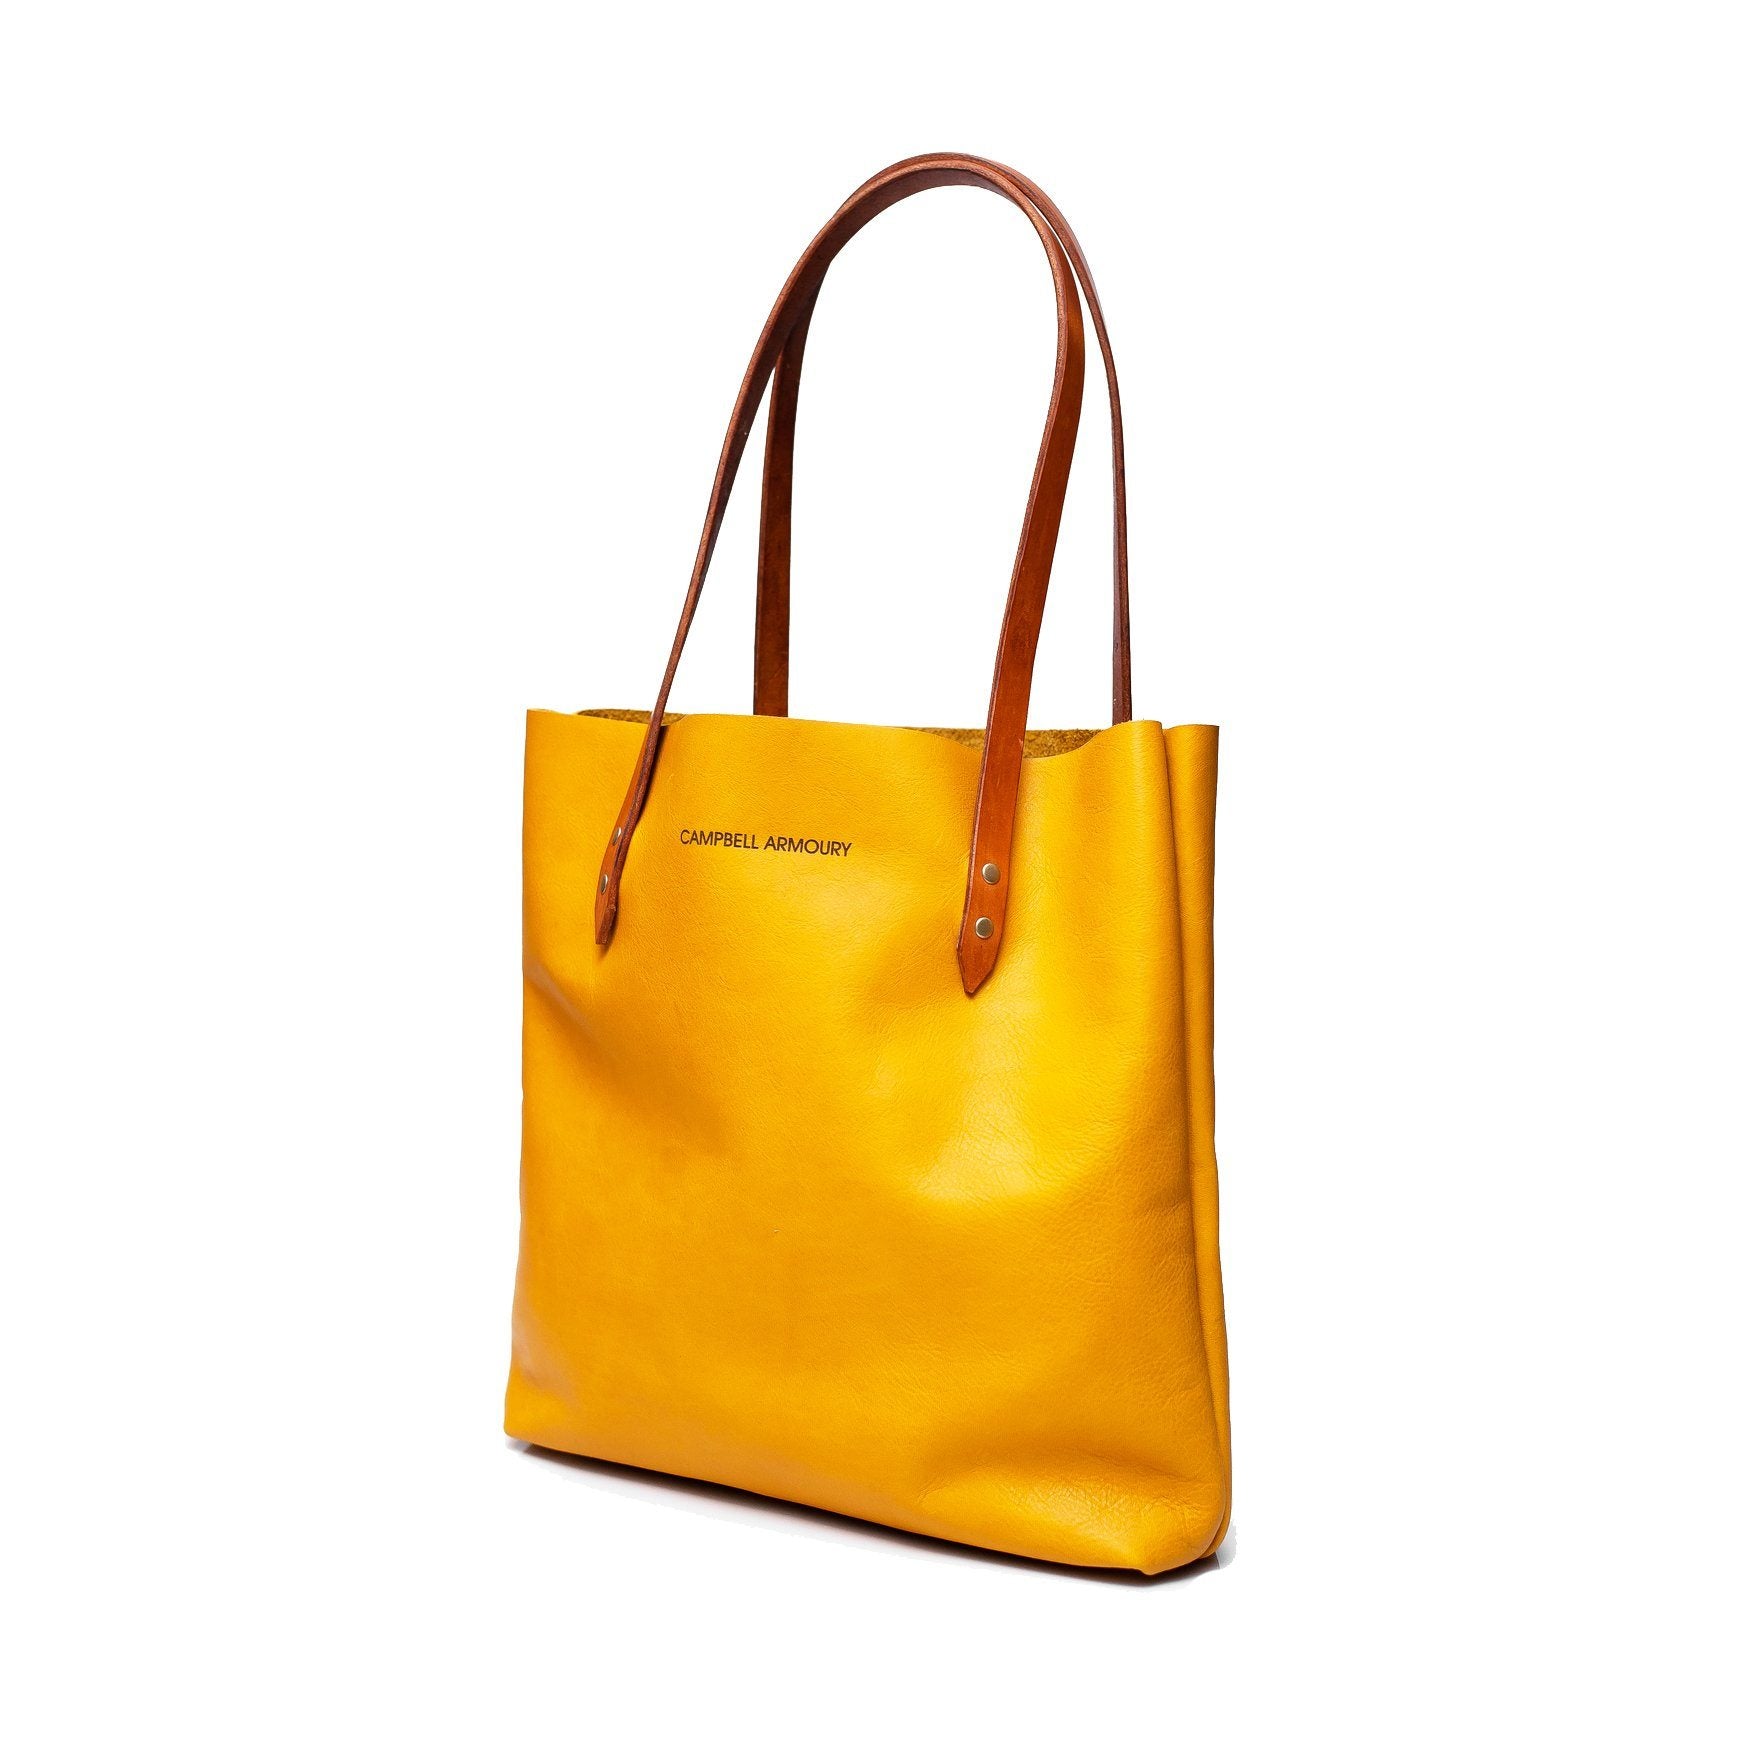 Campbell Armoury Leather Soft Tote Bag clothing & accessories Campbell Armoury mustard